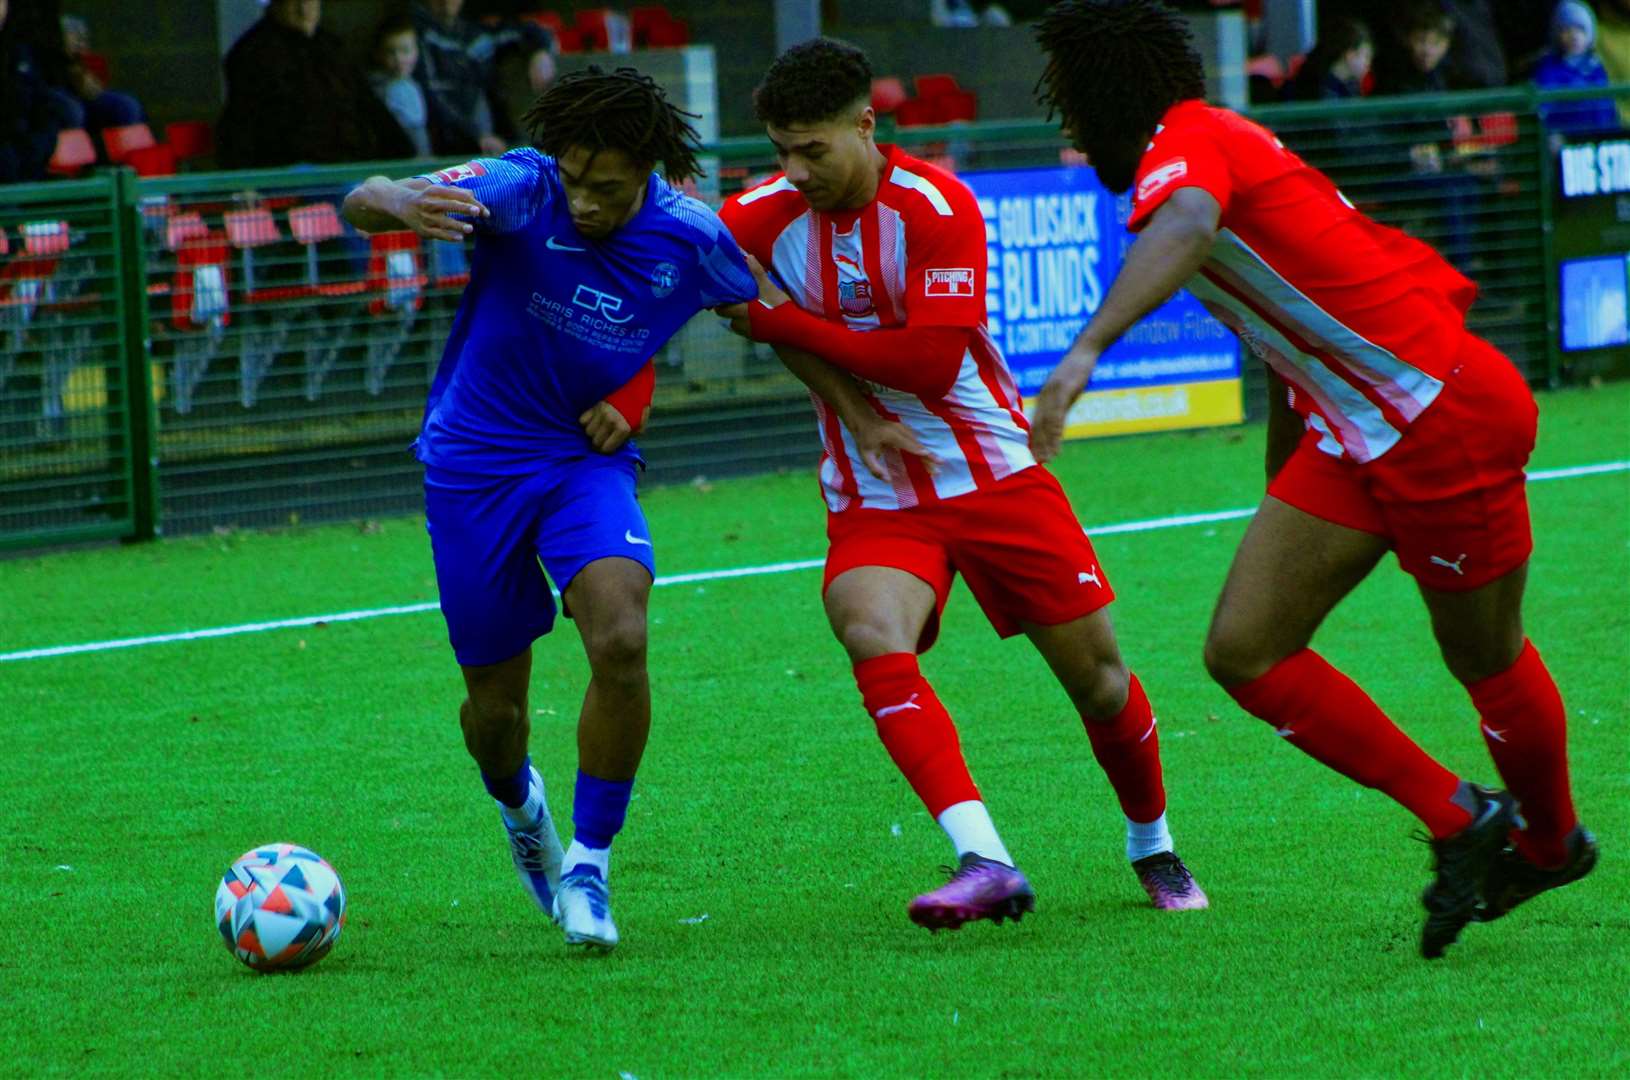 Herne Bay's Kymani Thomas being held by the Bowers & Pitsea defence. Picture: Keith Davy